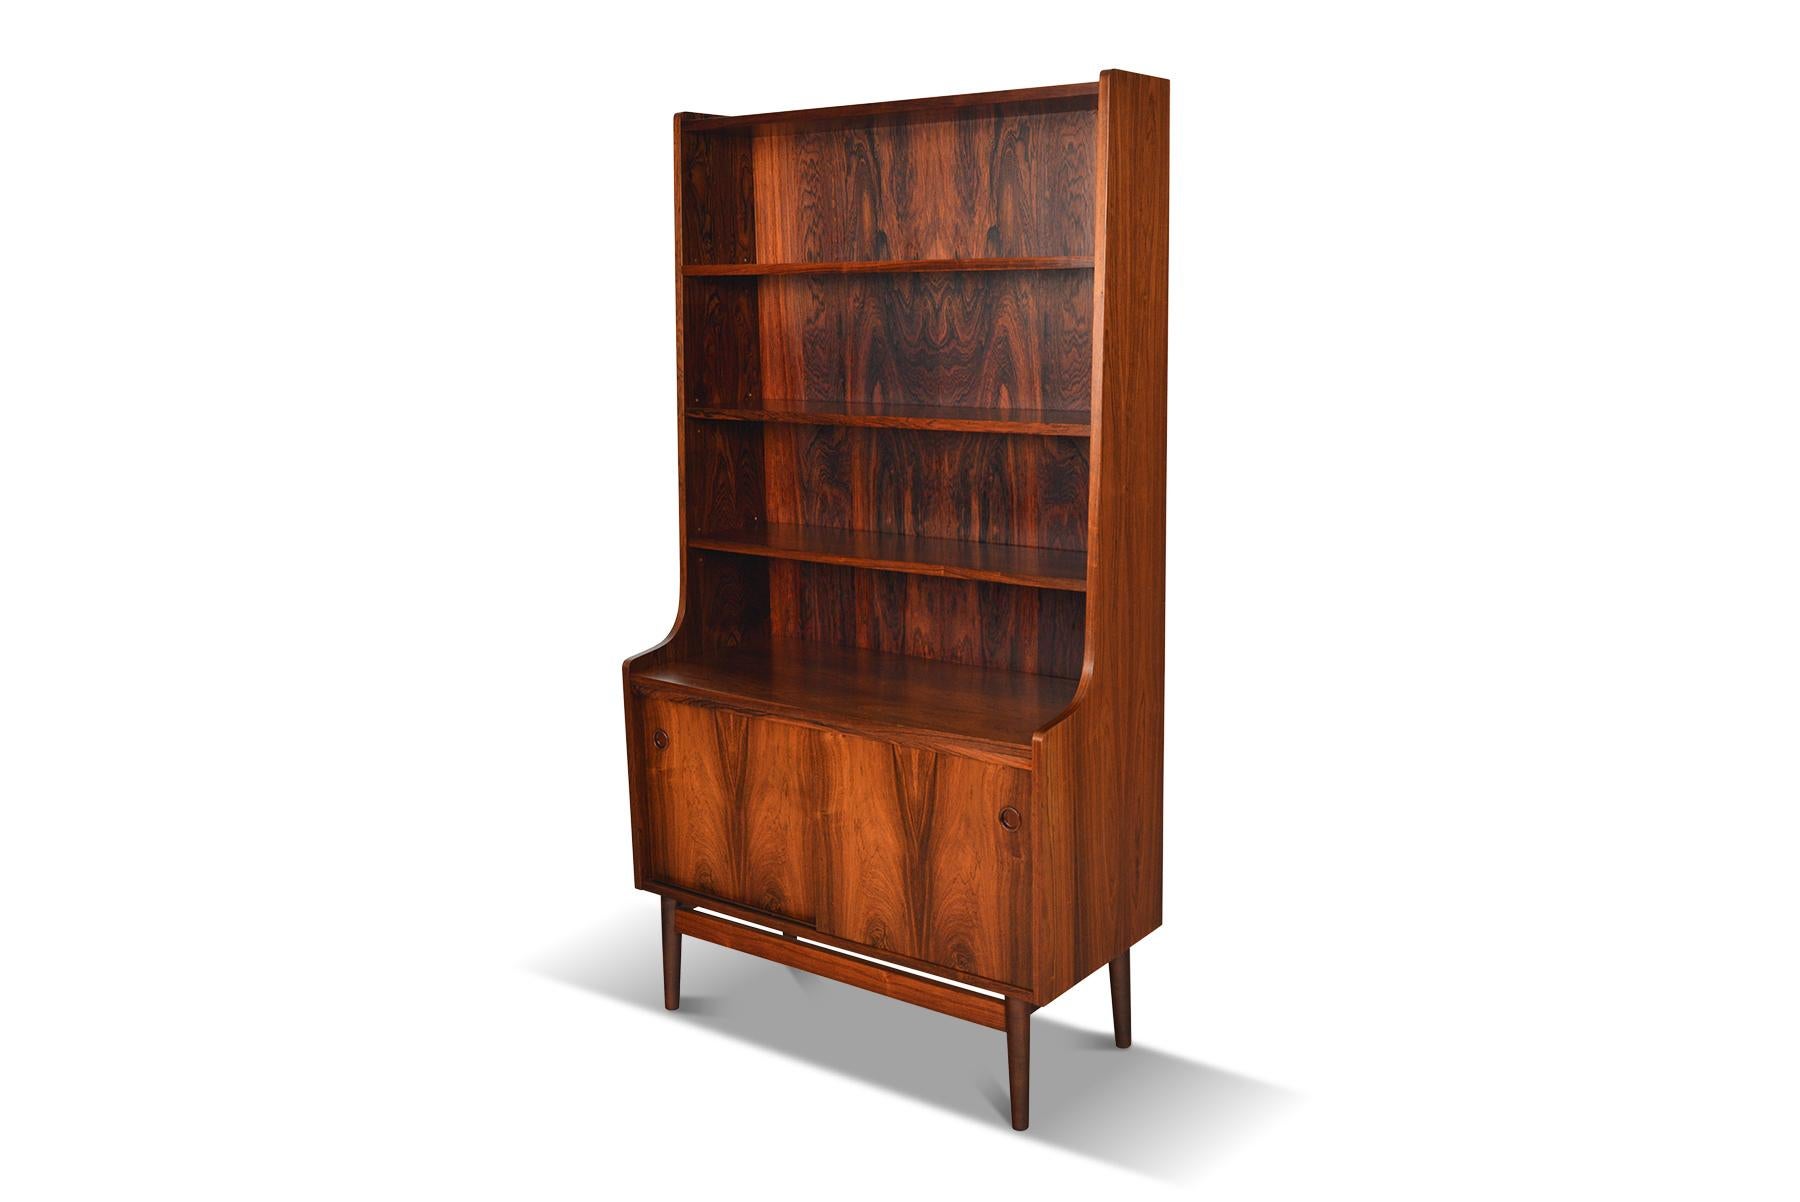 Origin: Denmark
Designer: Johannes Sorth
Manufacturer: Bornholms
Era: 1965
Materials: Rosewood
Measurements: 39.5? wide x 17? deep x 72? tall

Condition: In excellent original condition with light vintage wear. Any cosmetic imperfections will